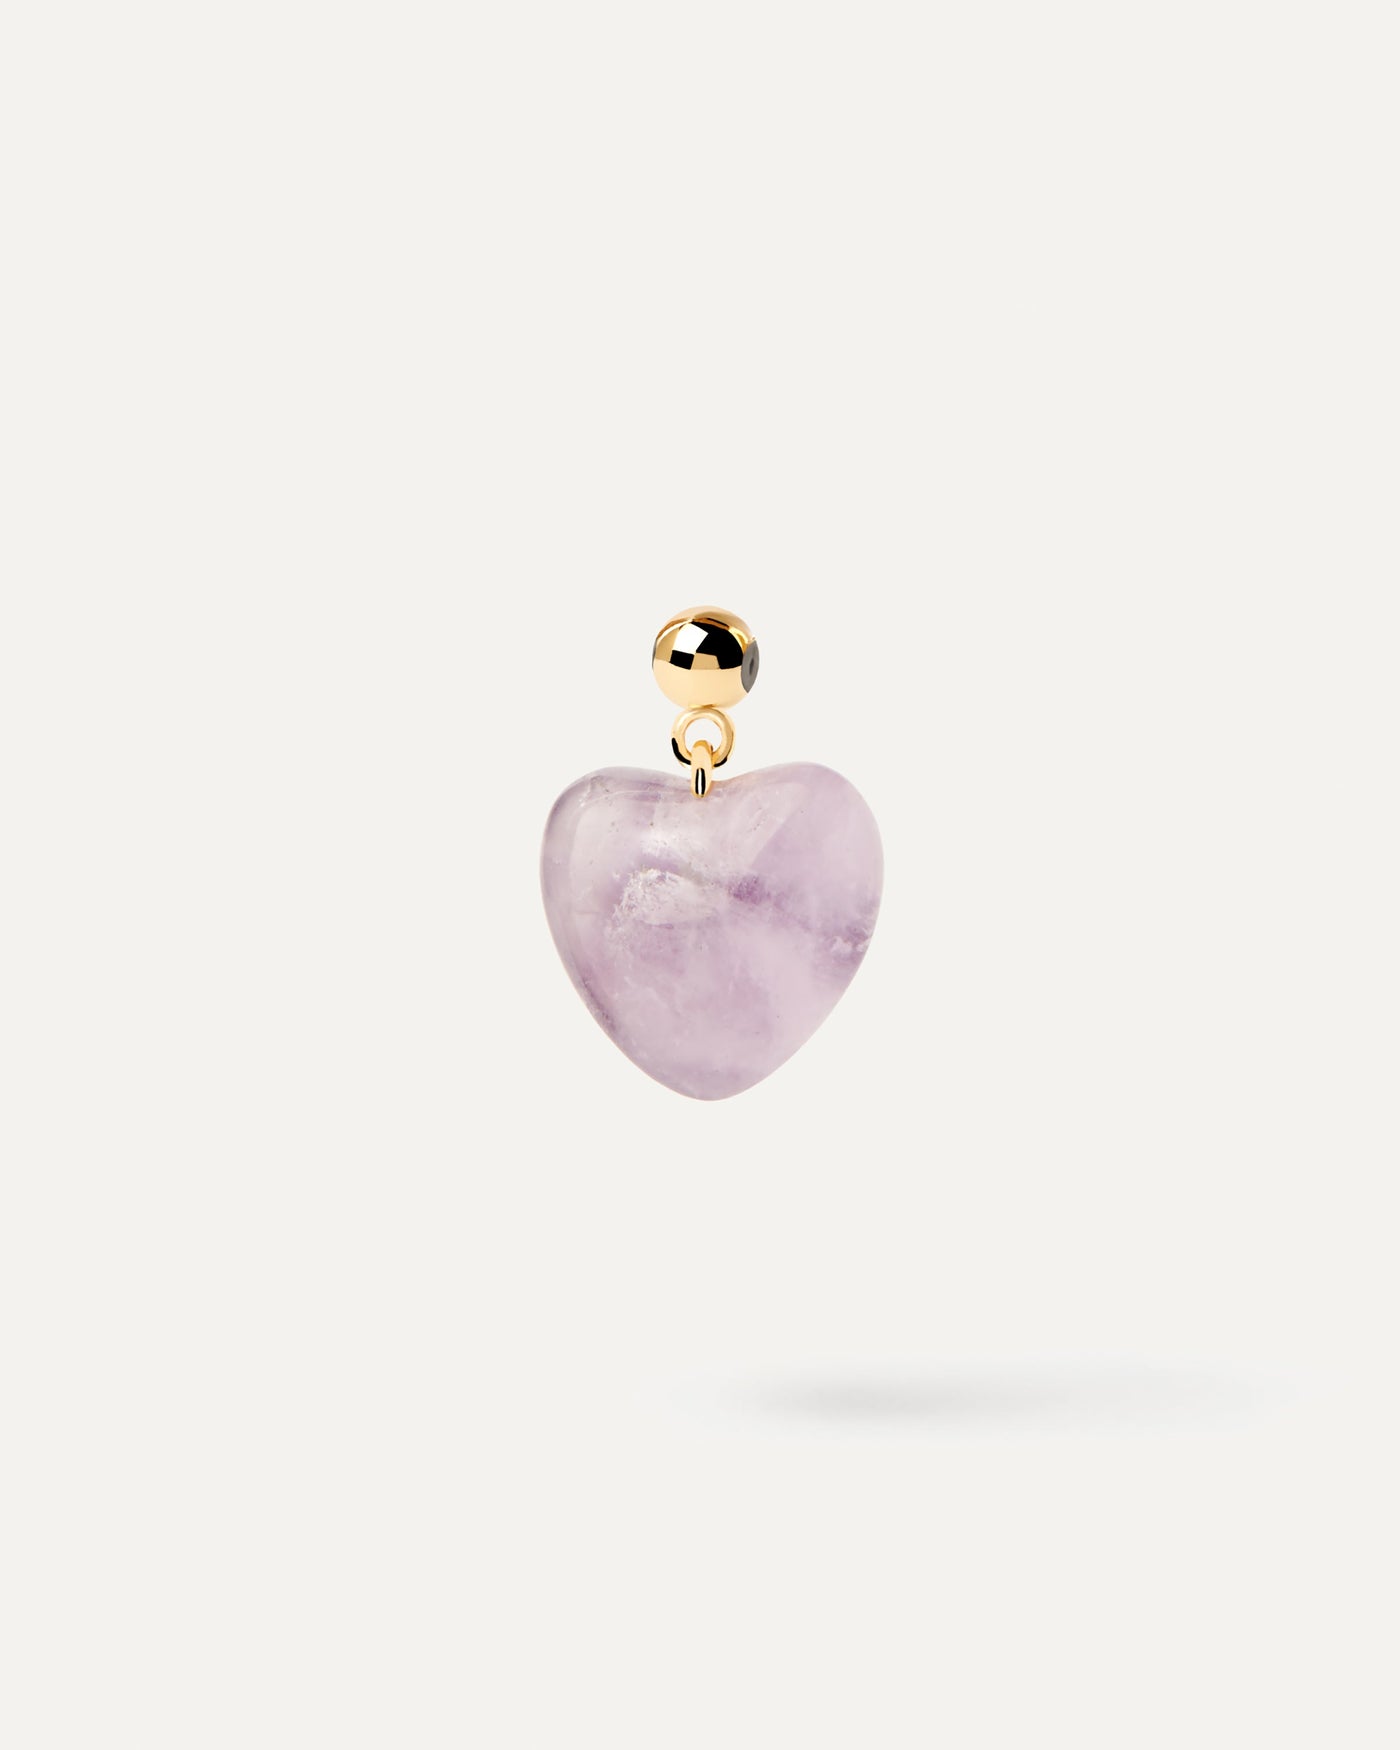 2023 Selection | Amethyst Heart Charm . Get the latest arrival from PDPAOLA. Place your order safely and get this Best Seller. Free Shipping.